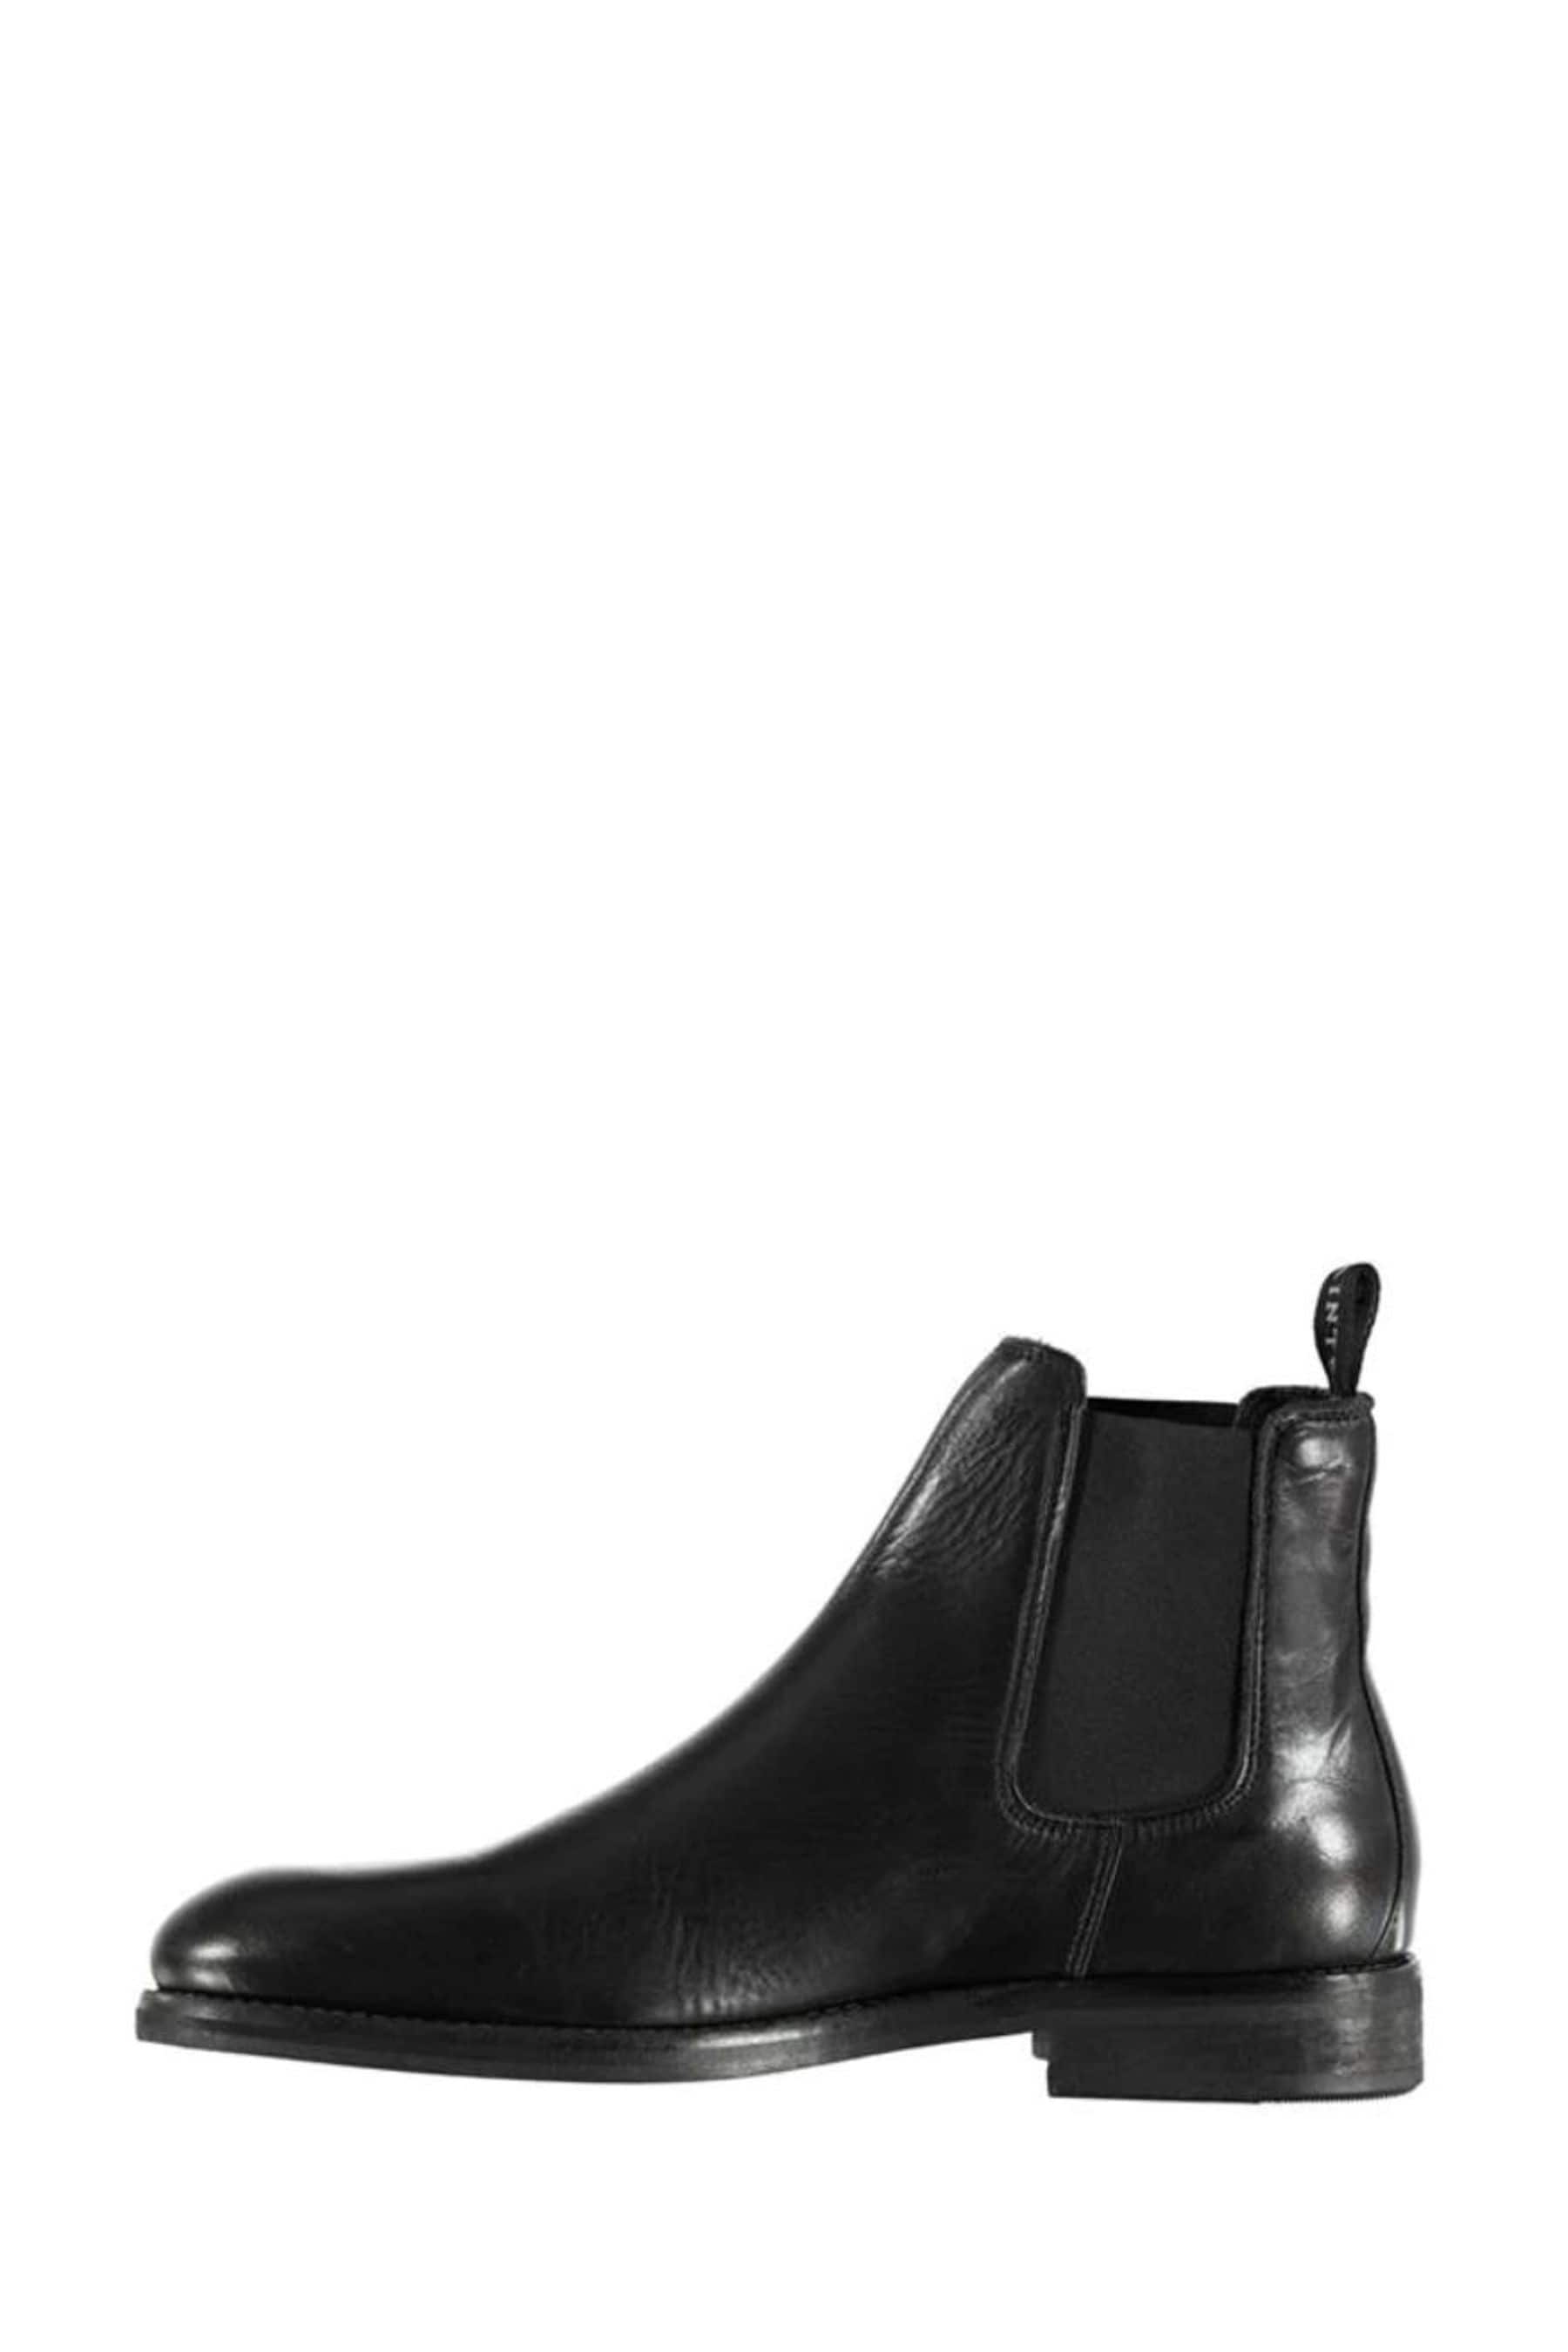 Buy AllSaints Harley Black Chelsea Satin Leather Boots from the Next UK ...